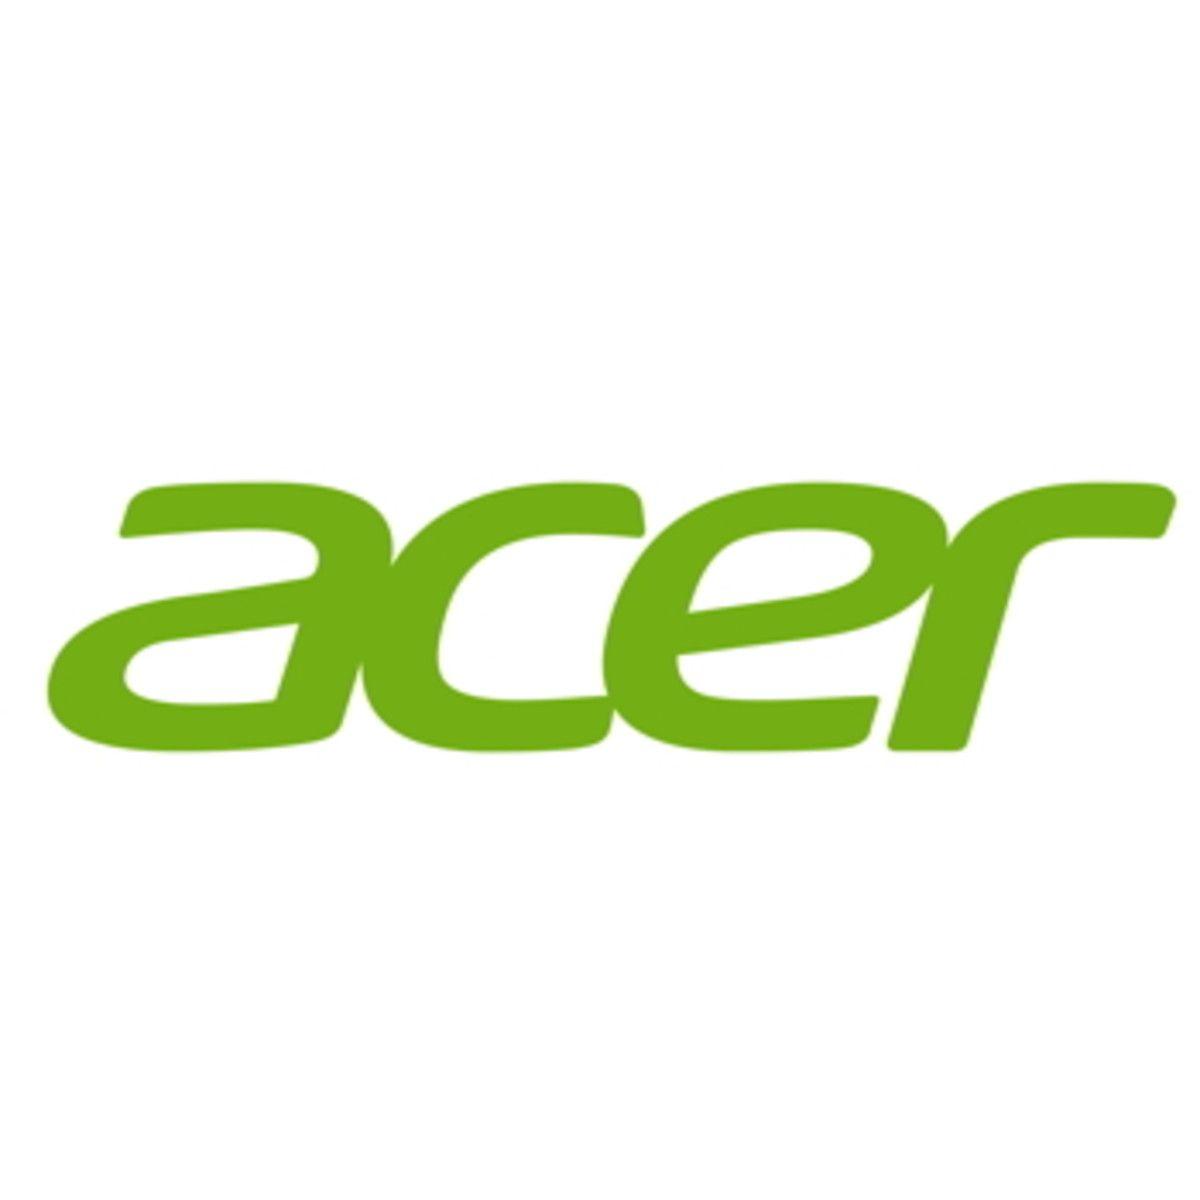 Ceo.com Logo - Acer shares jump following CEO appointment and management ...